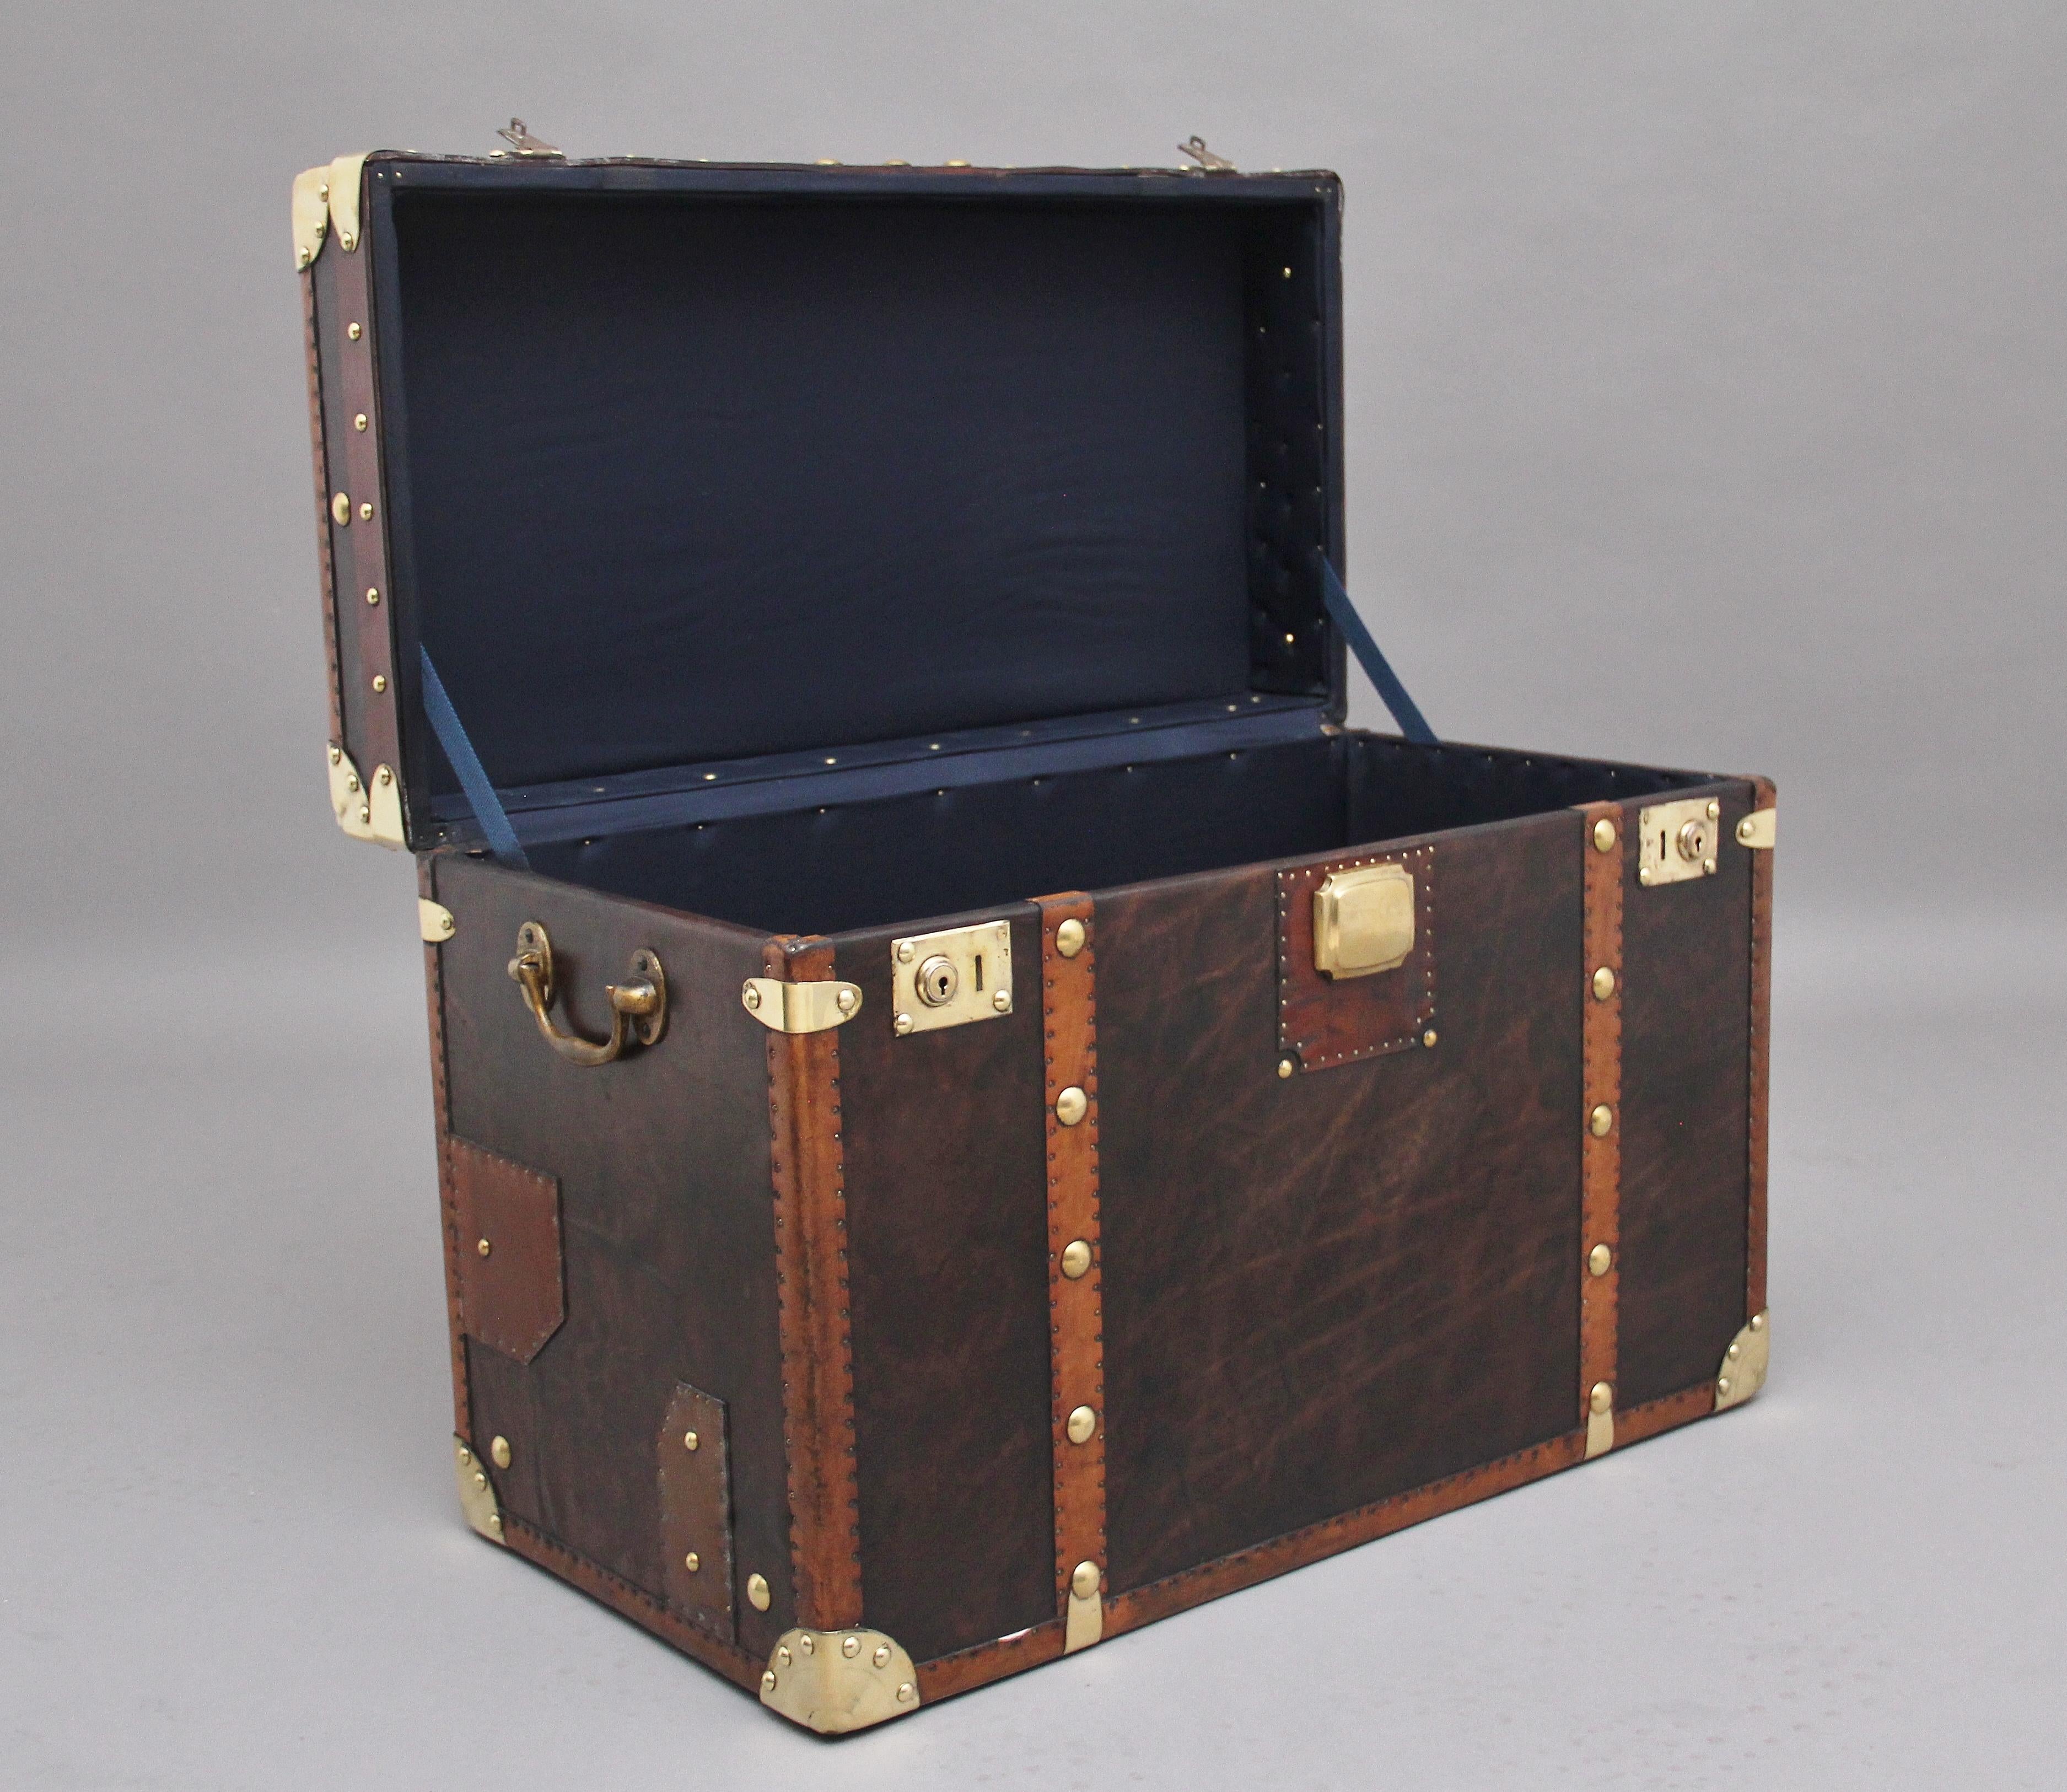 Early 20th century leather bound ex army trunk with brass straps and corners, copper studs and brass carrying handles on the sides, the trunk opens to reveal a nice dark blue lined interior, on the top of the trunk there is the regimental badge